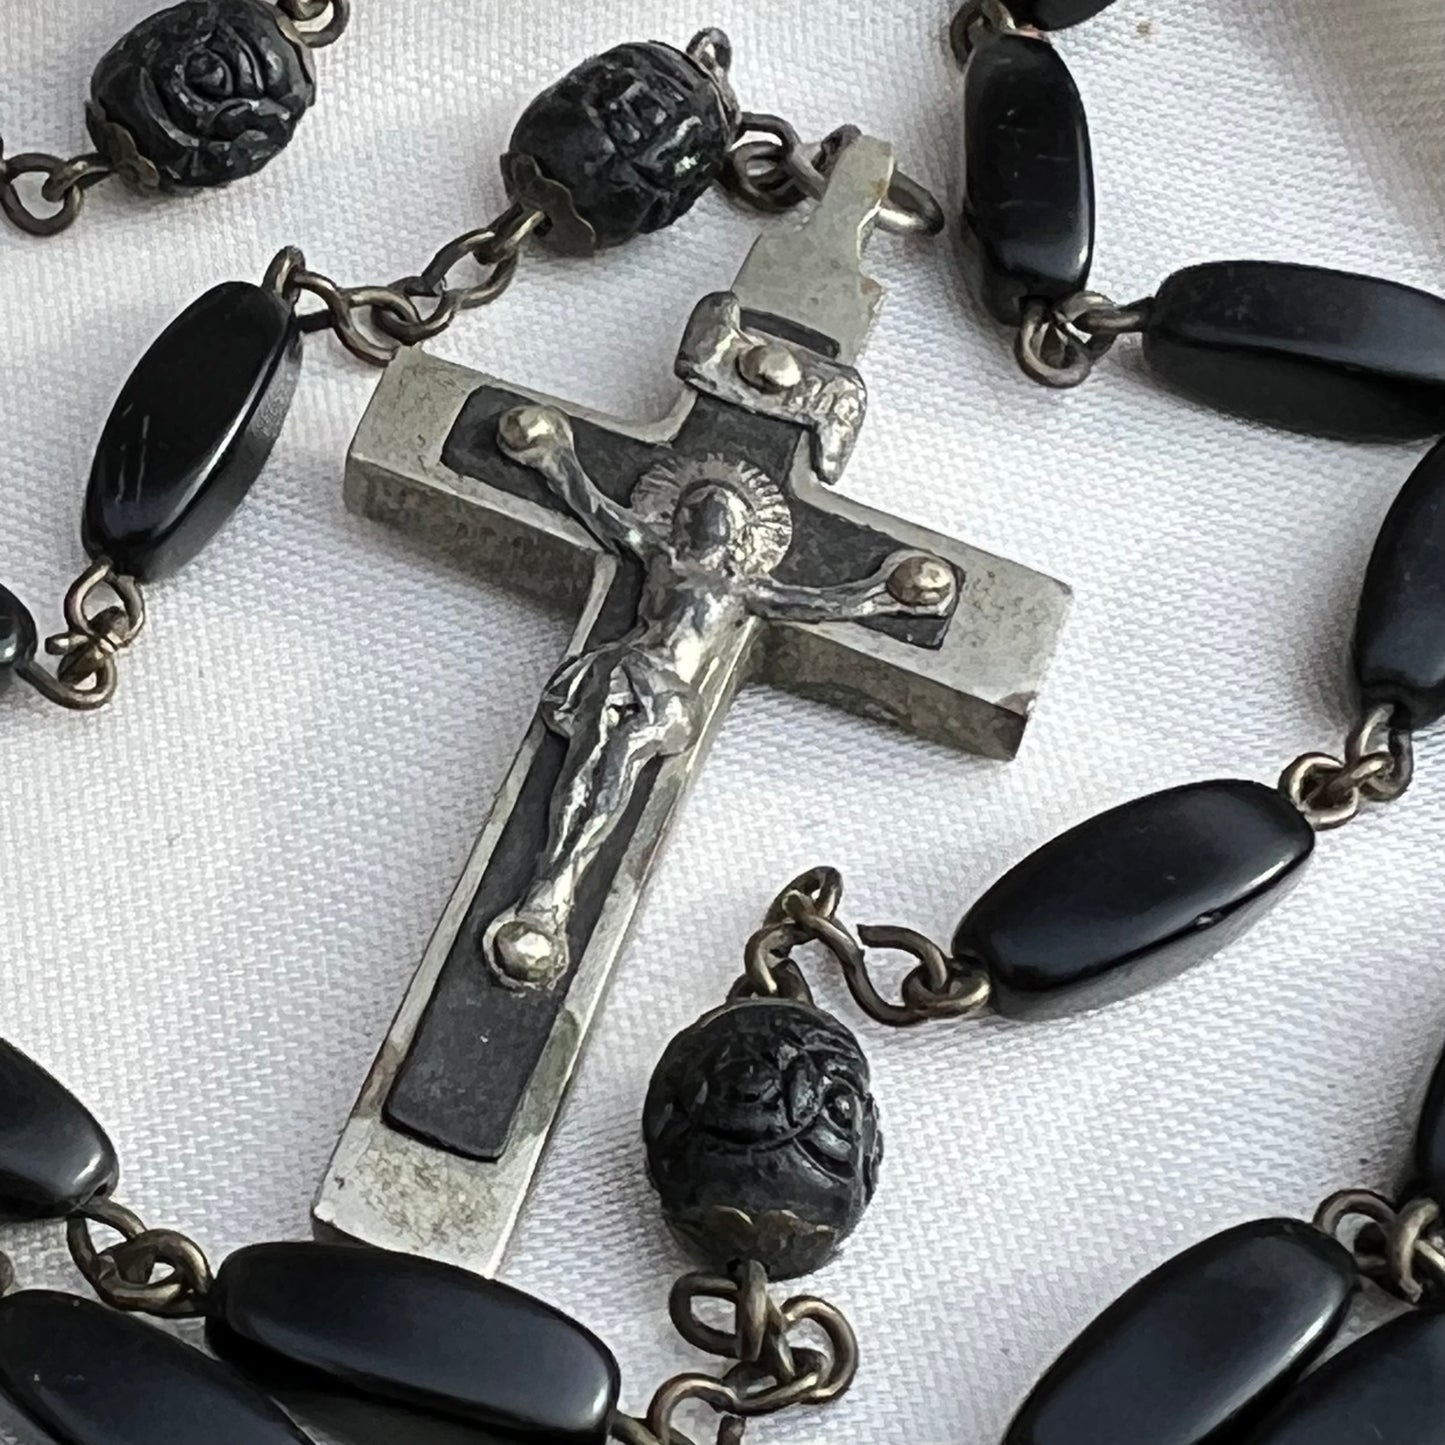 Vintage French Black Bead Rosary